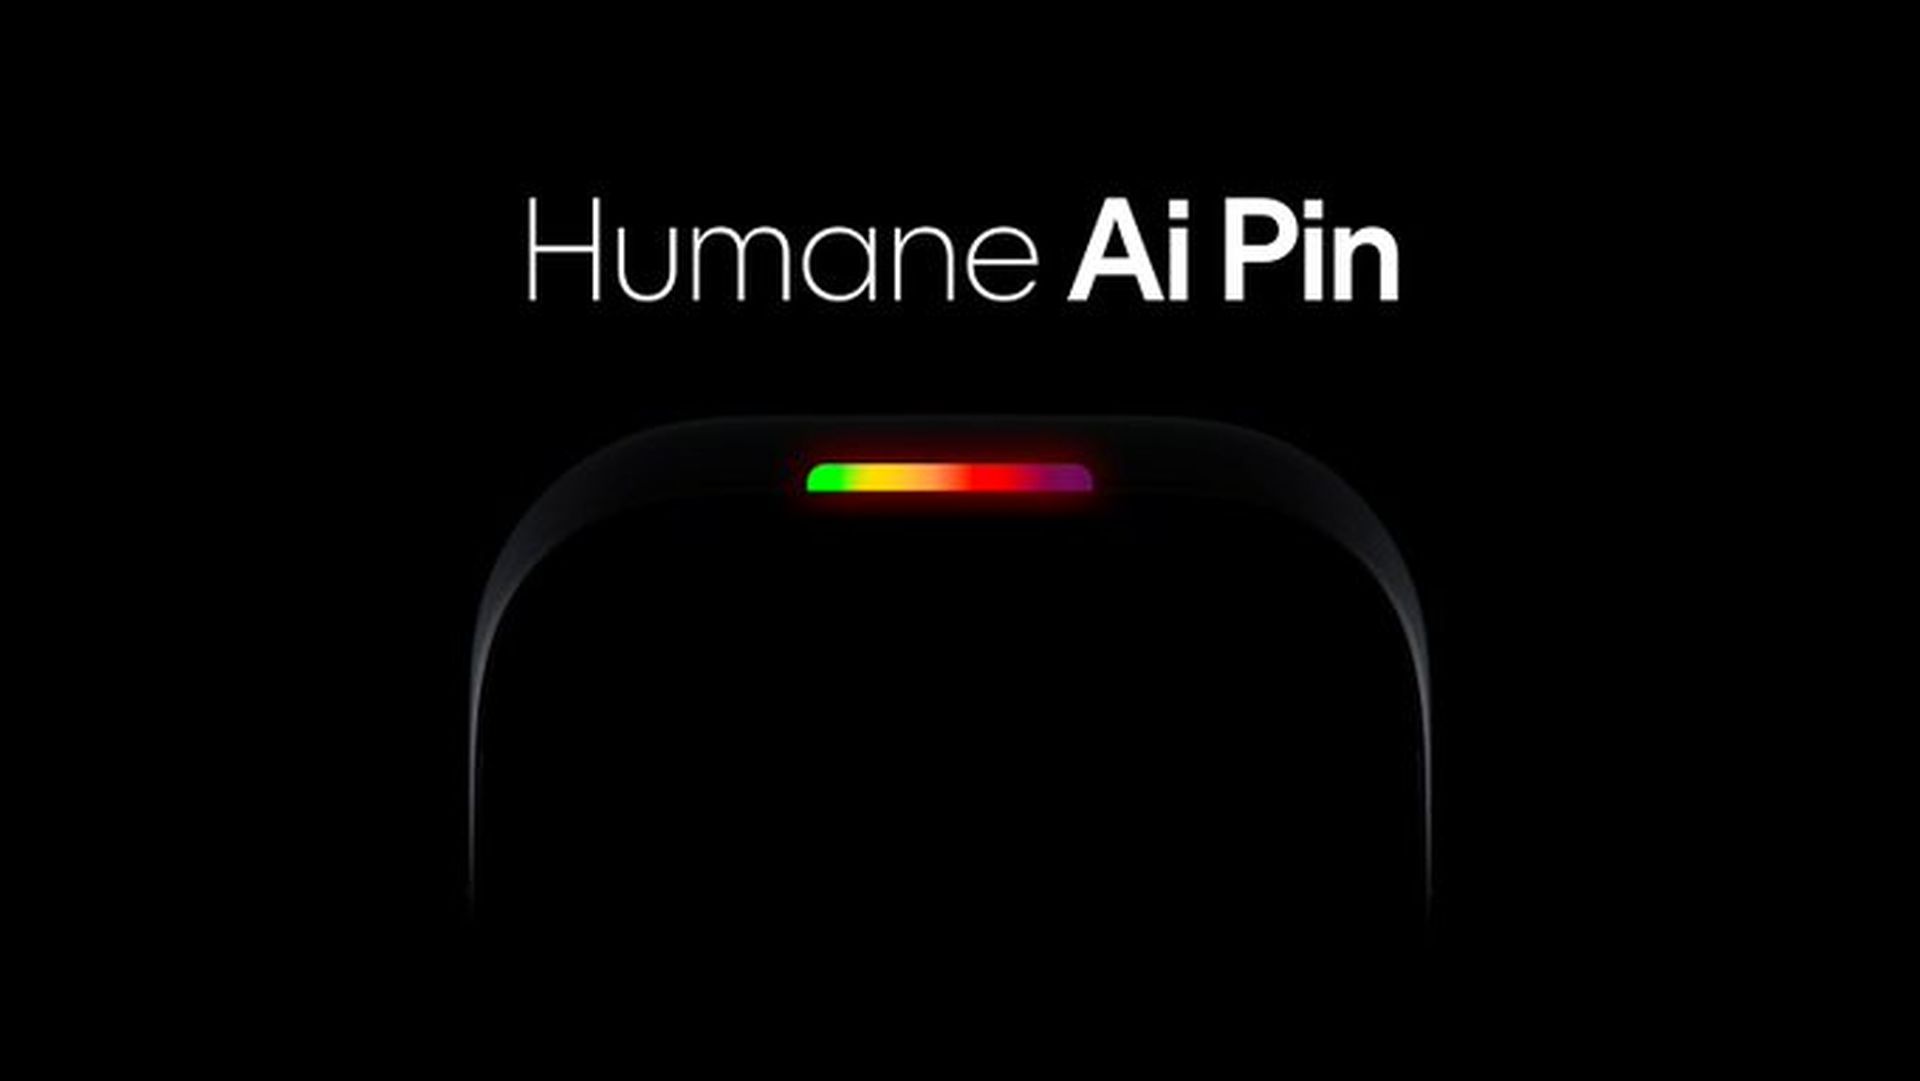 Soon, you will see Humane AI Pins on the street